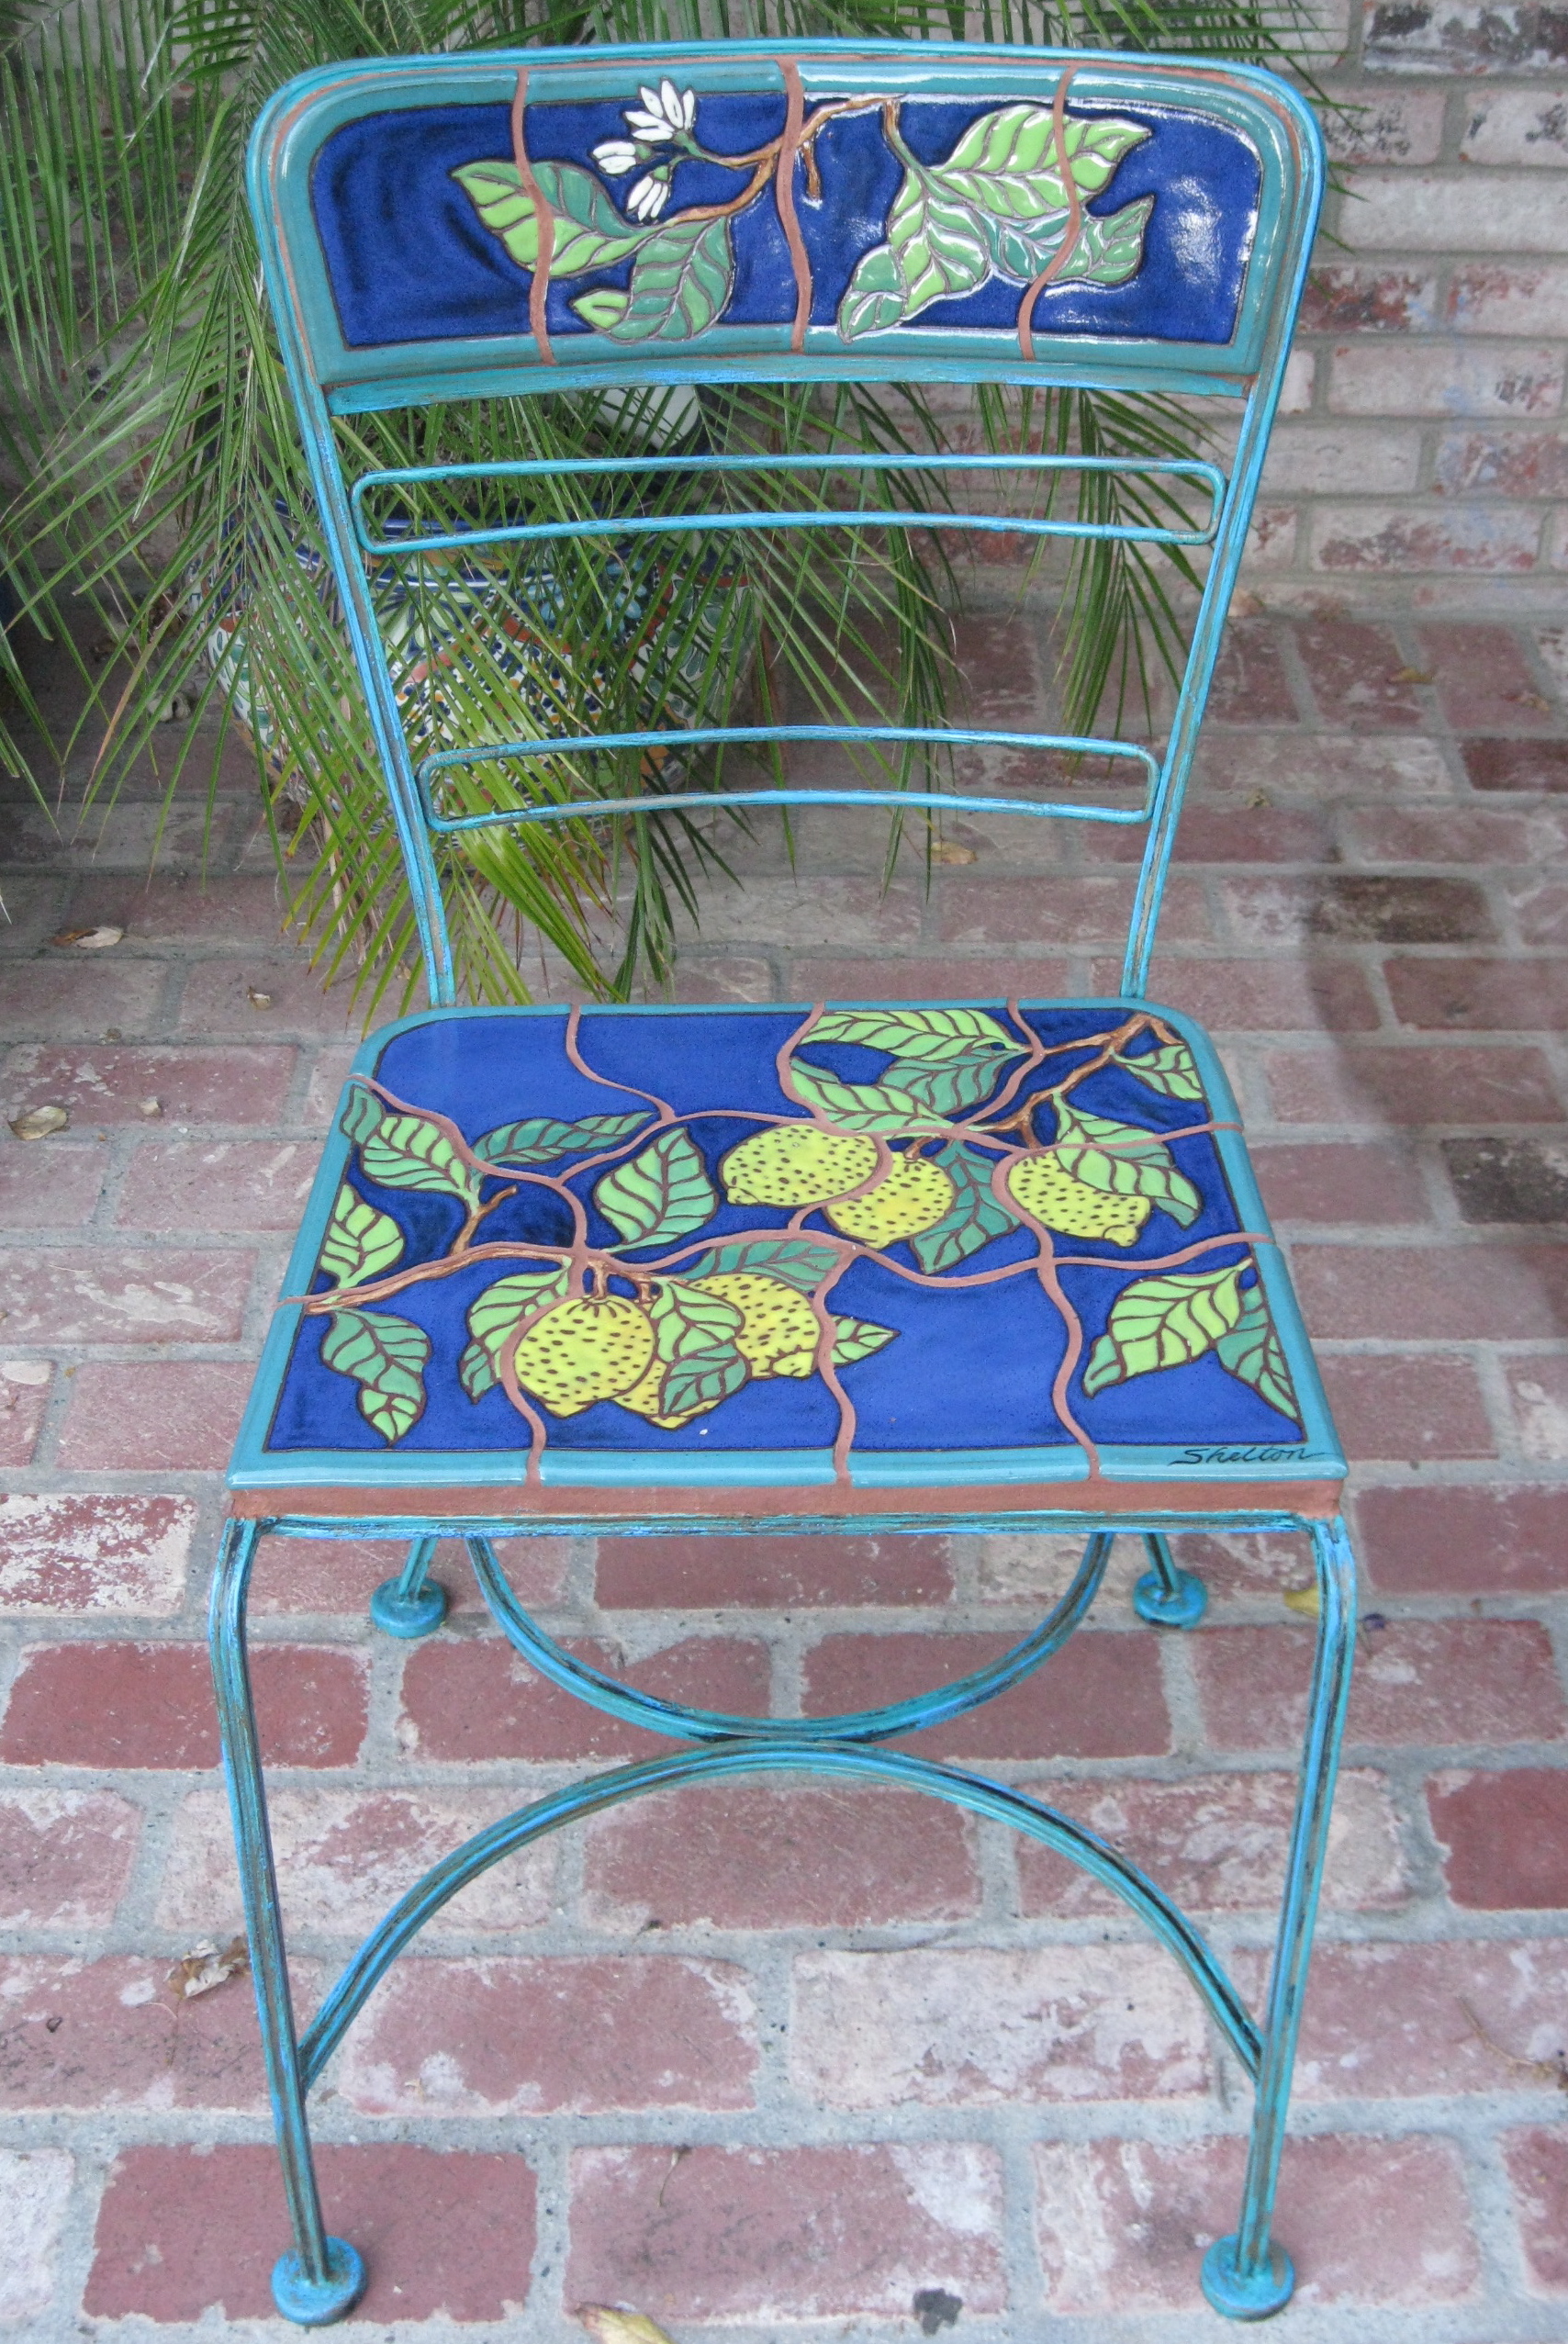 Colorful Ceramic Chair Using Recylced Metal Frame